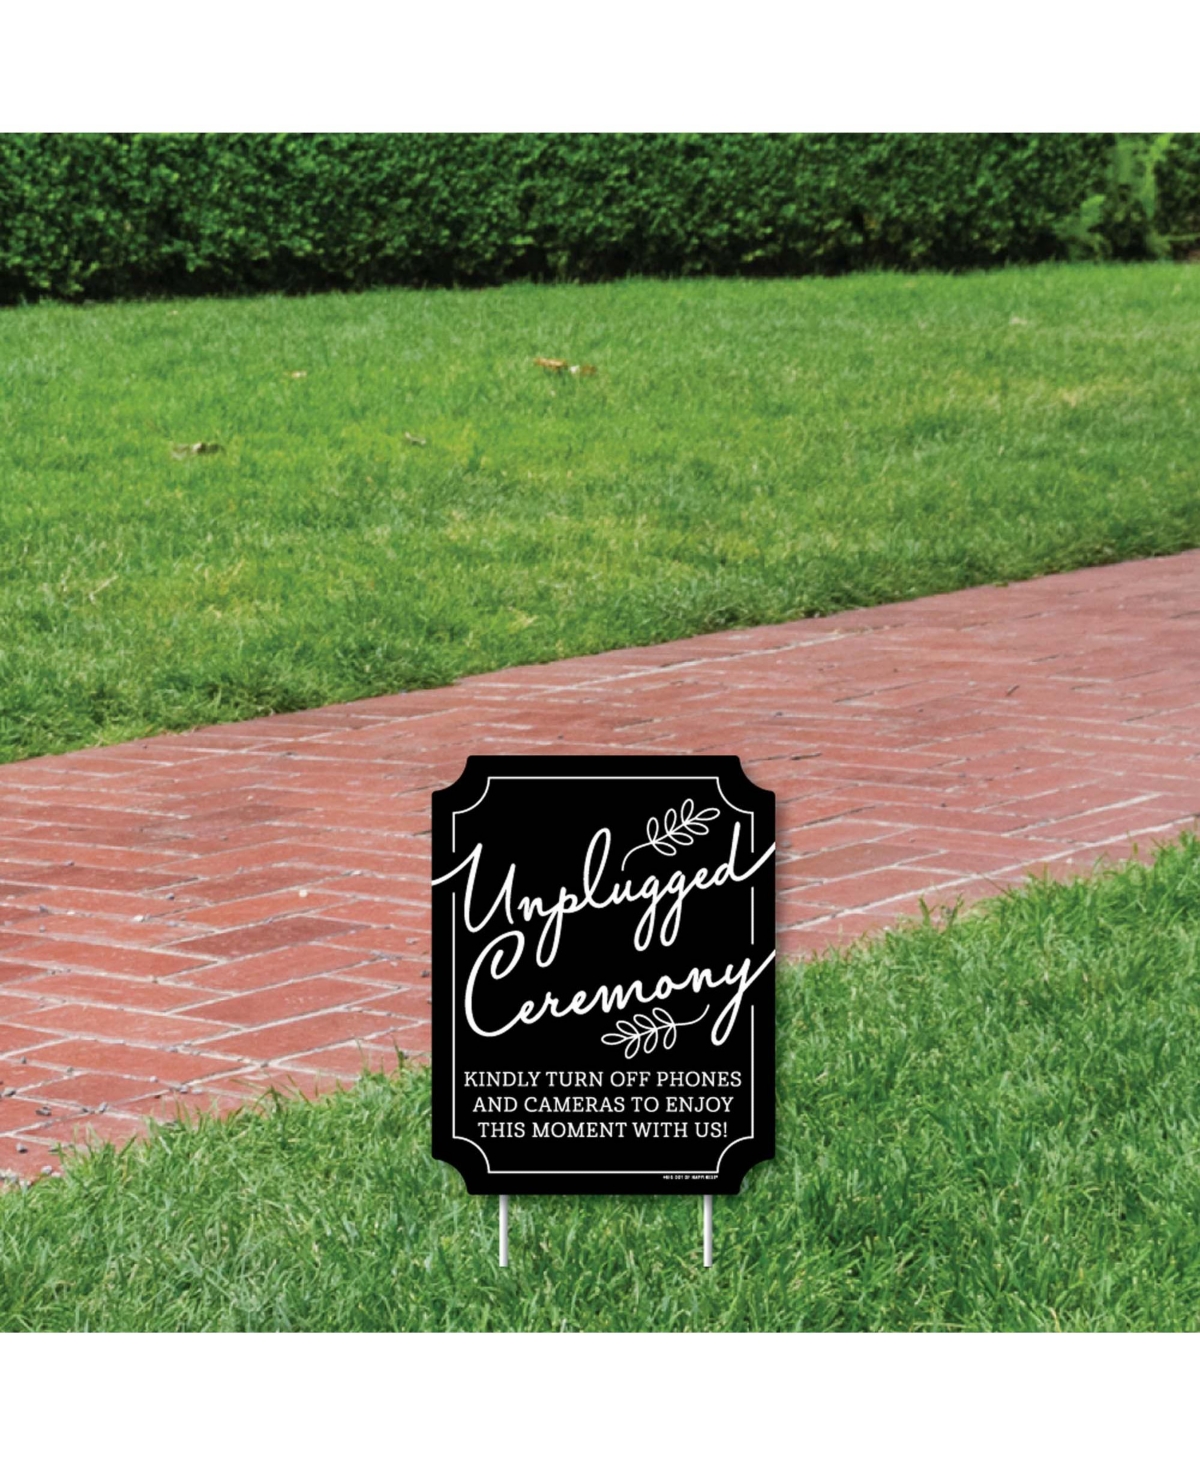 Black Unplugged Ceremony - Outdoor Lawn Sign - No Cell Phone Yard Sign - 1 Pc - Black